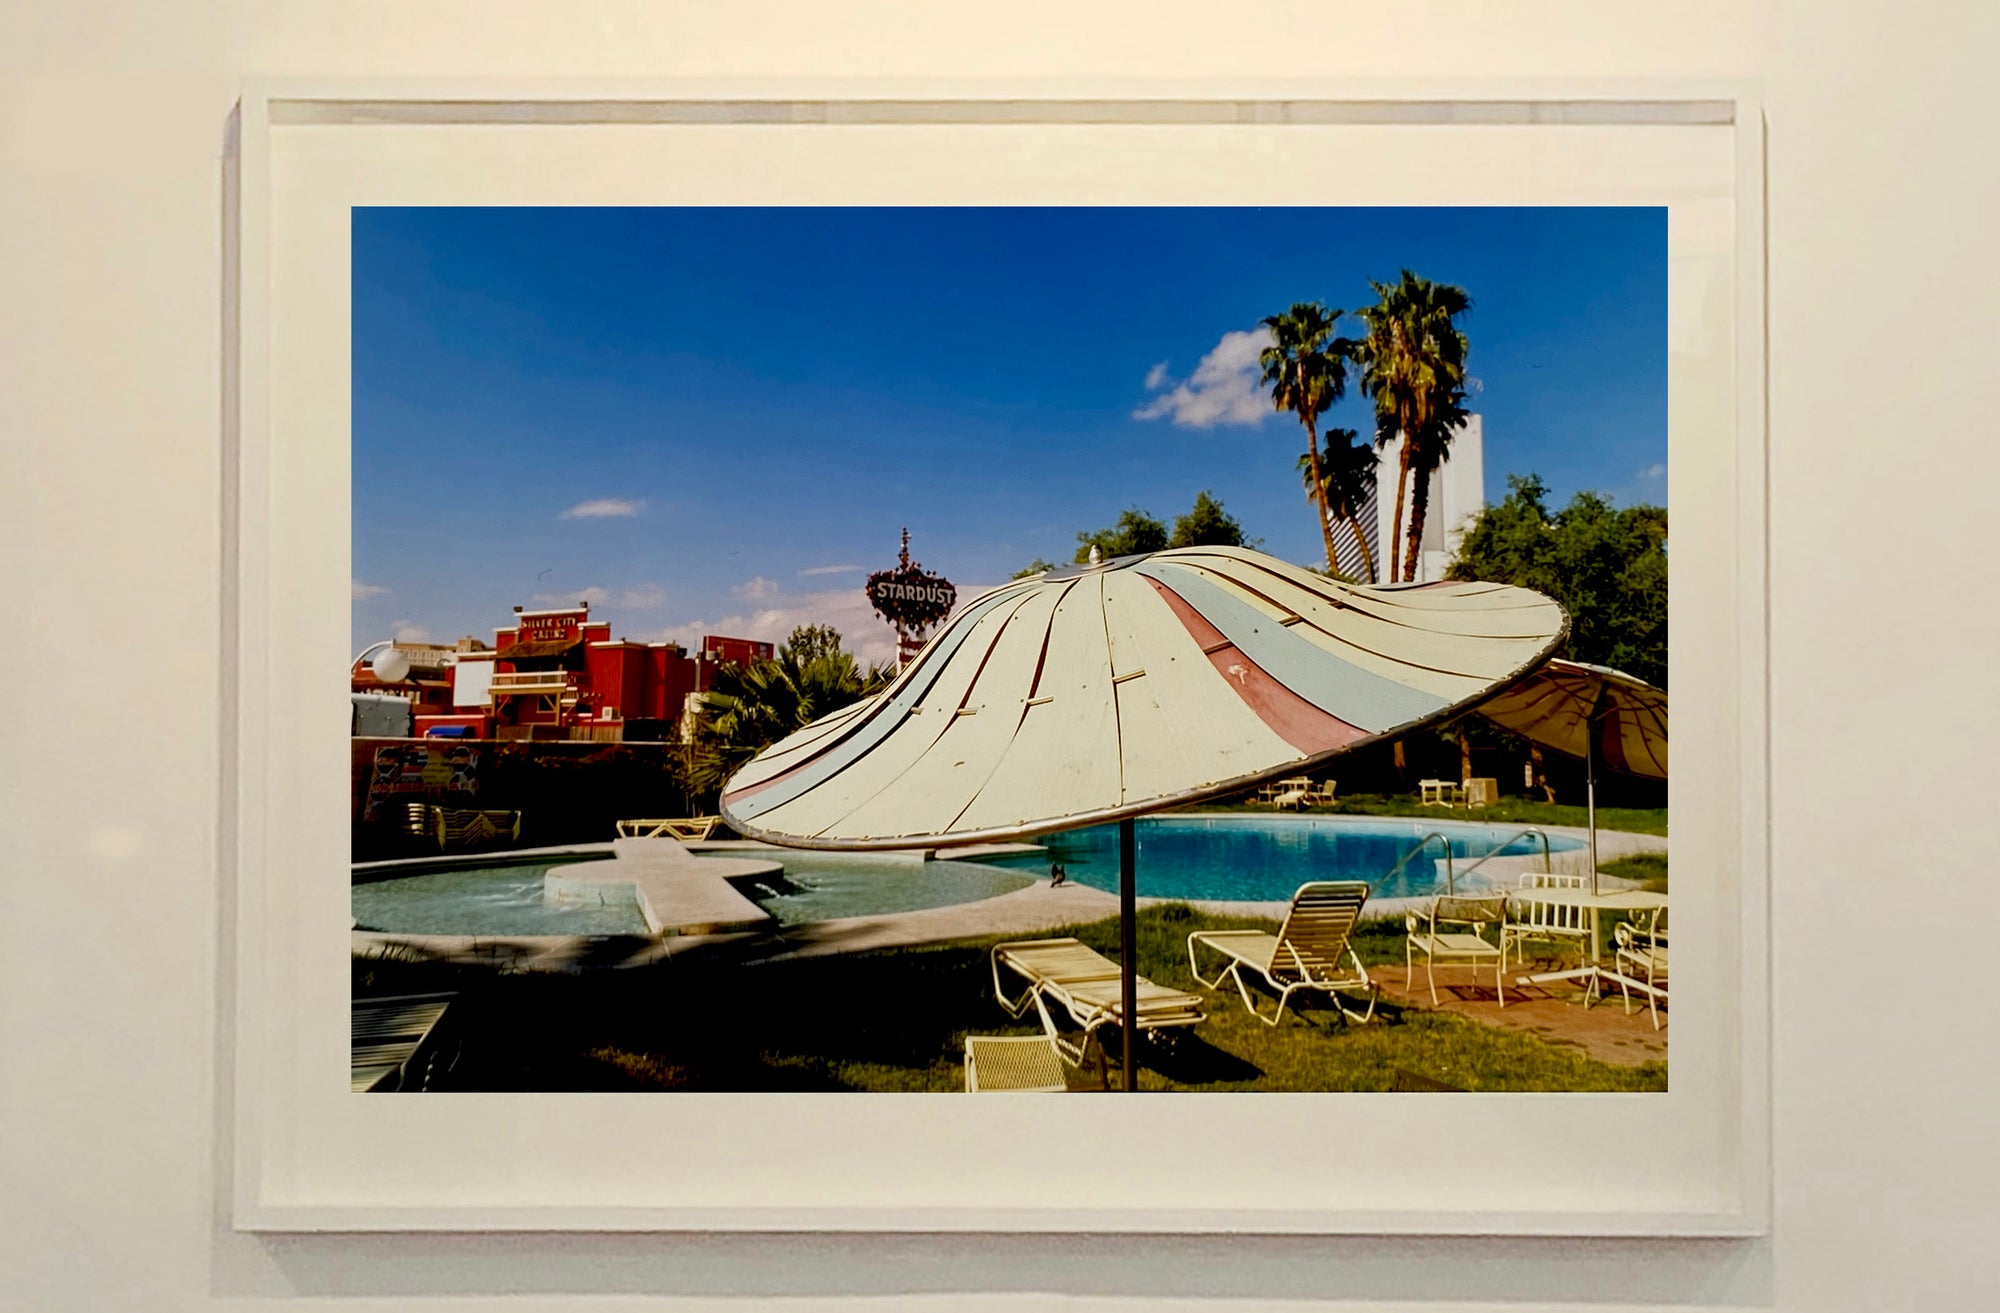 A vintage parasol, poolside at the El Morocco Motel, Las Vegas, Nevada, overlooked by palm trees, blue skies and iconic neon signs. Part of Richard Heeps' 'Dream in Colour' series.